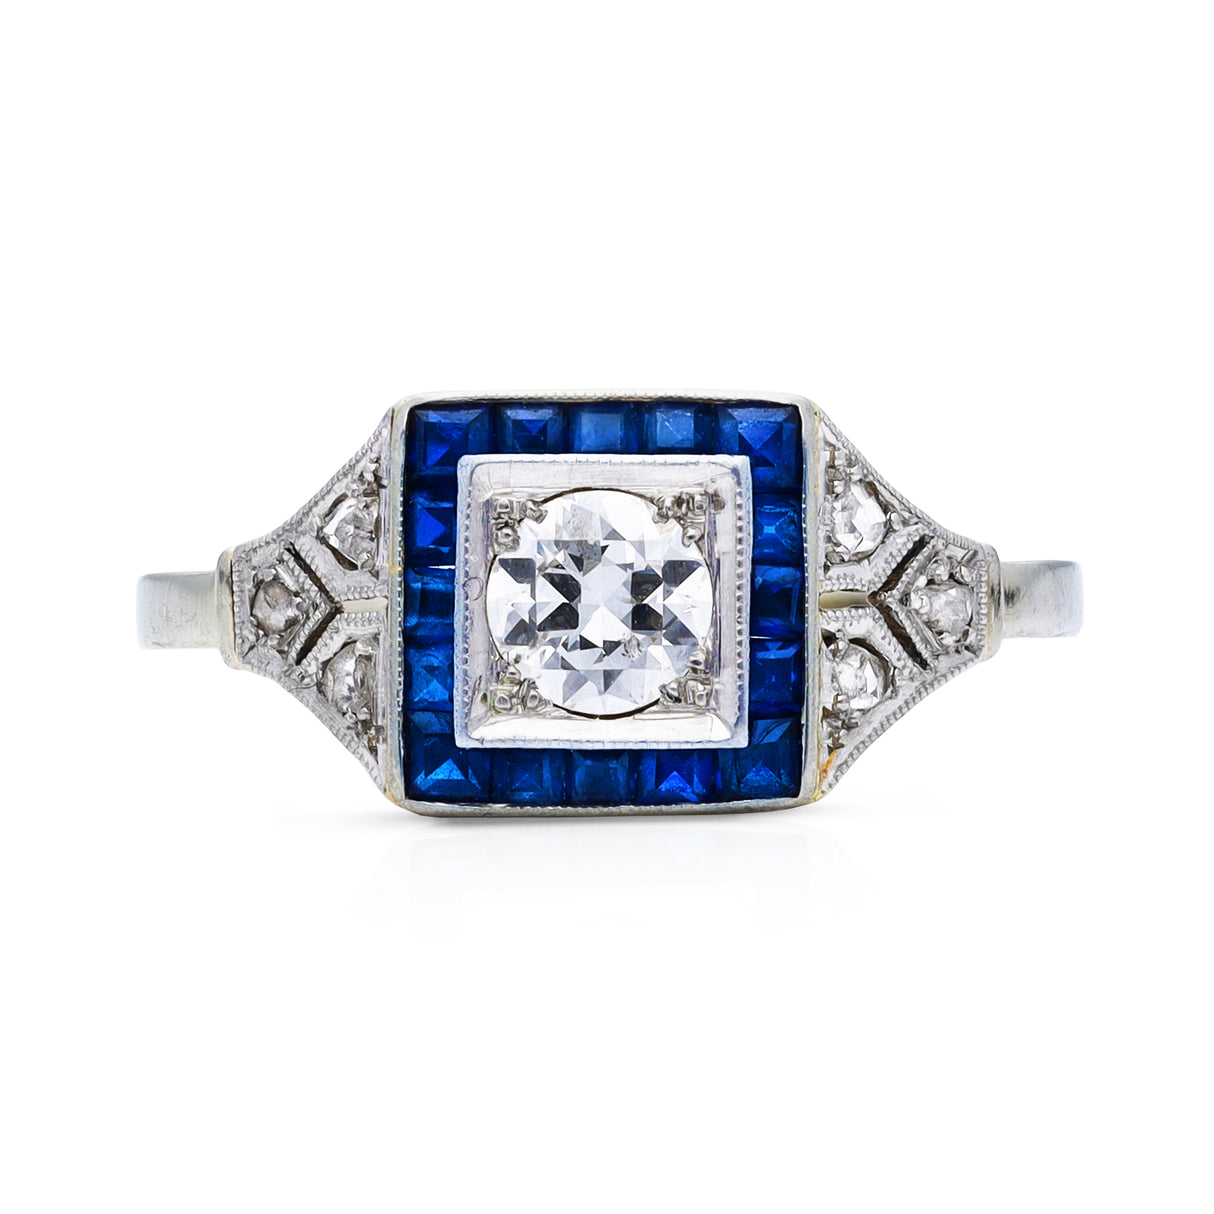 Vintage sapphire and diamond engagement ring, front view.